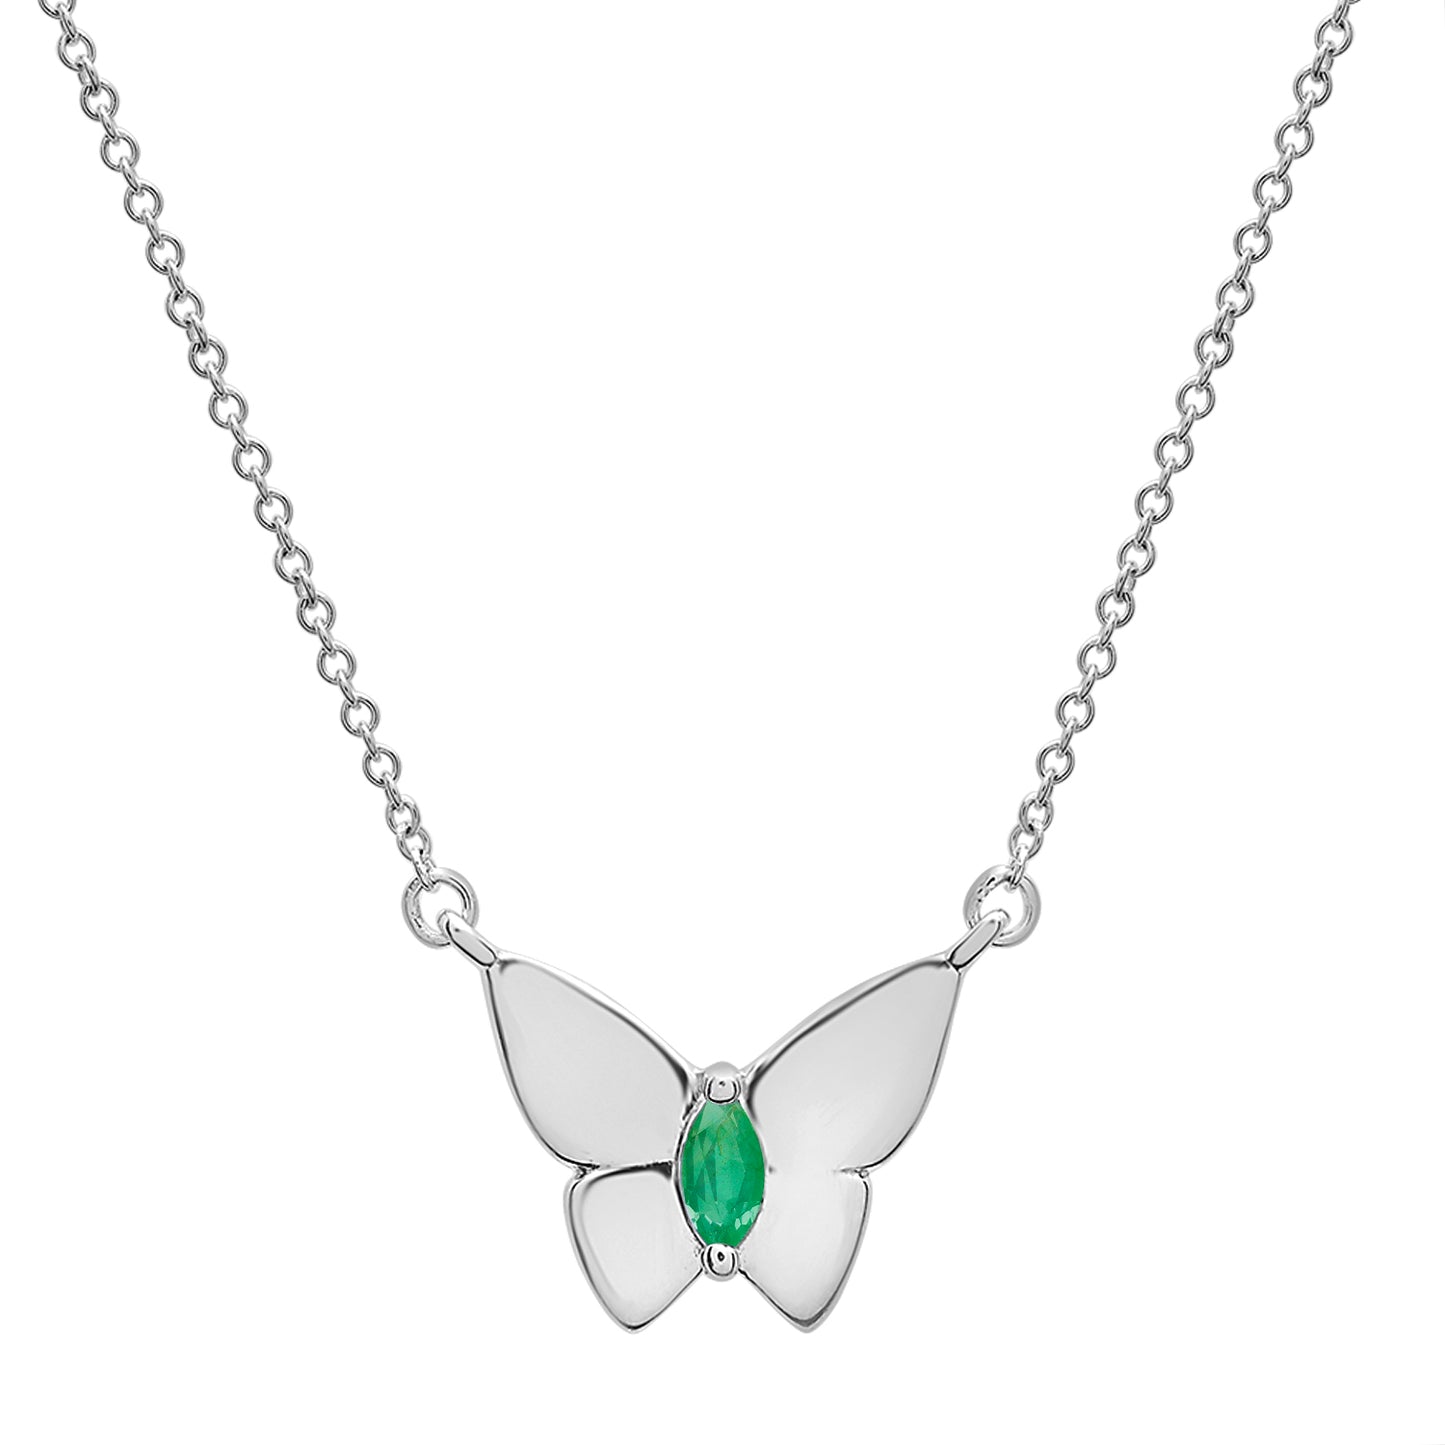 Green Stone Butterfly Birthstone Necklace with Silver chain